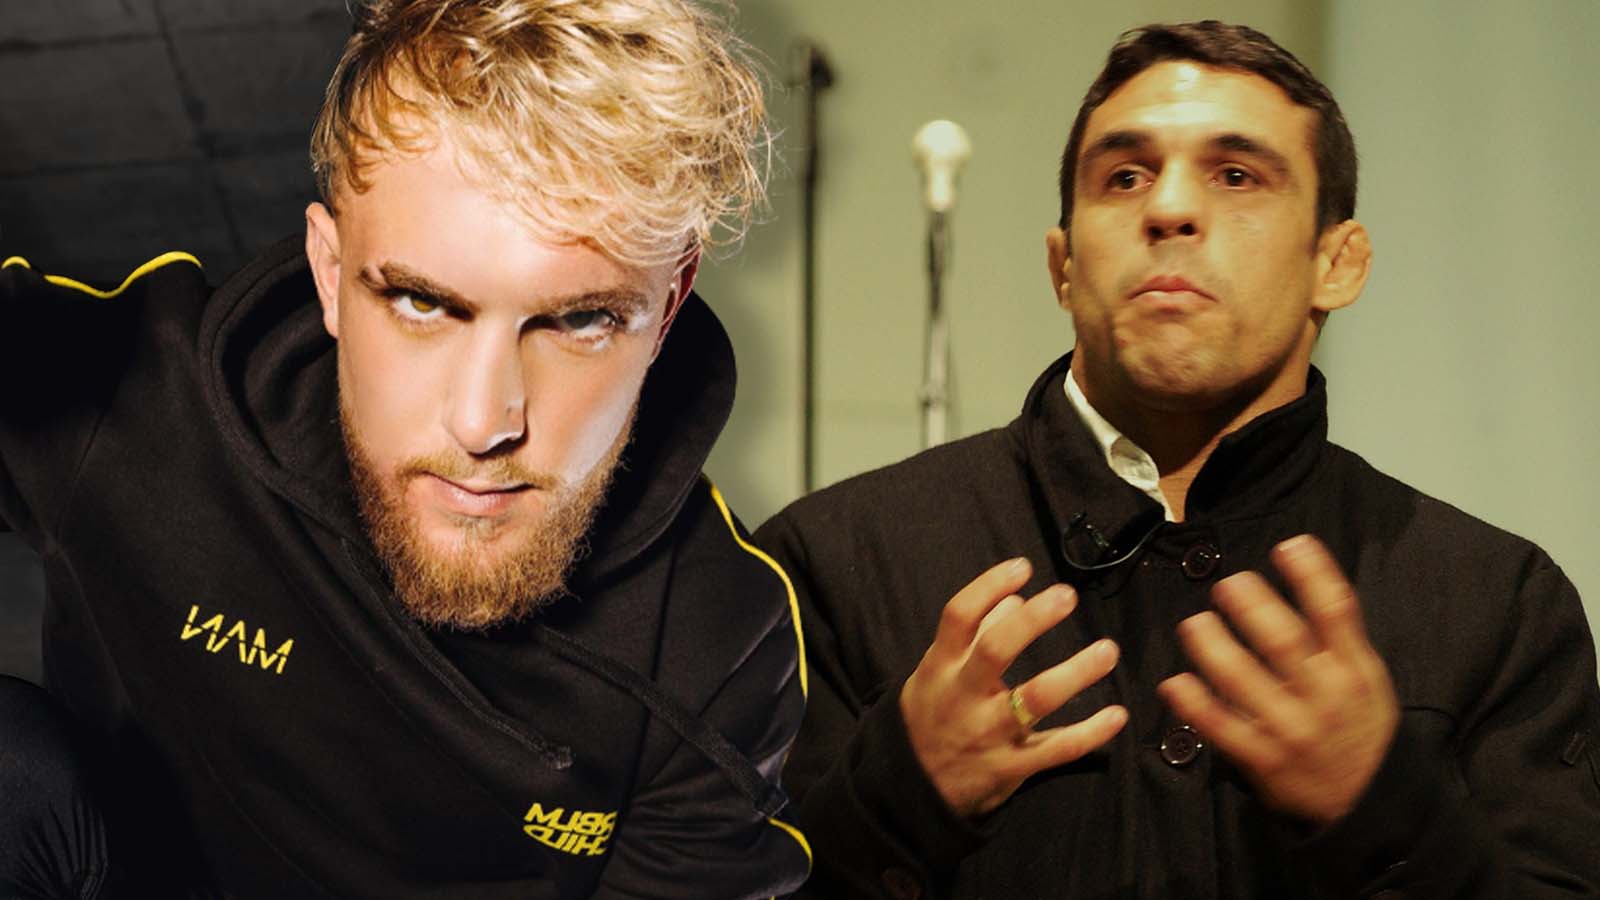 Jake Paul shuts down Vitor Belfort's $30m fight challenge: “That doesn’t excite me”